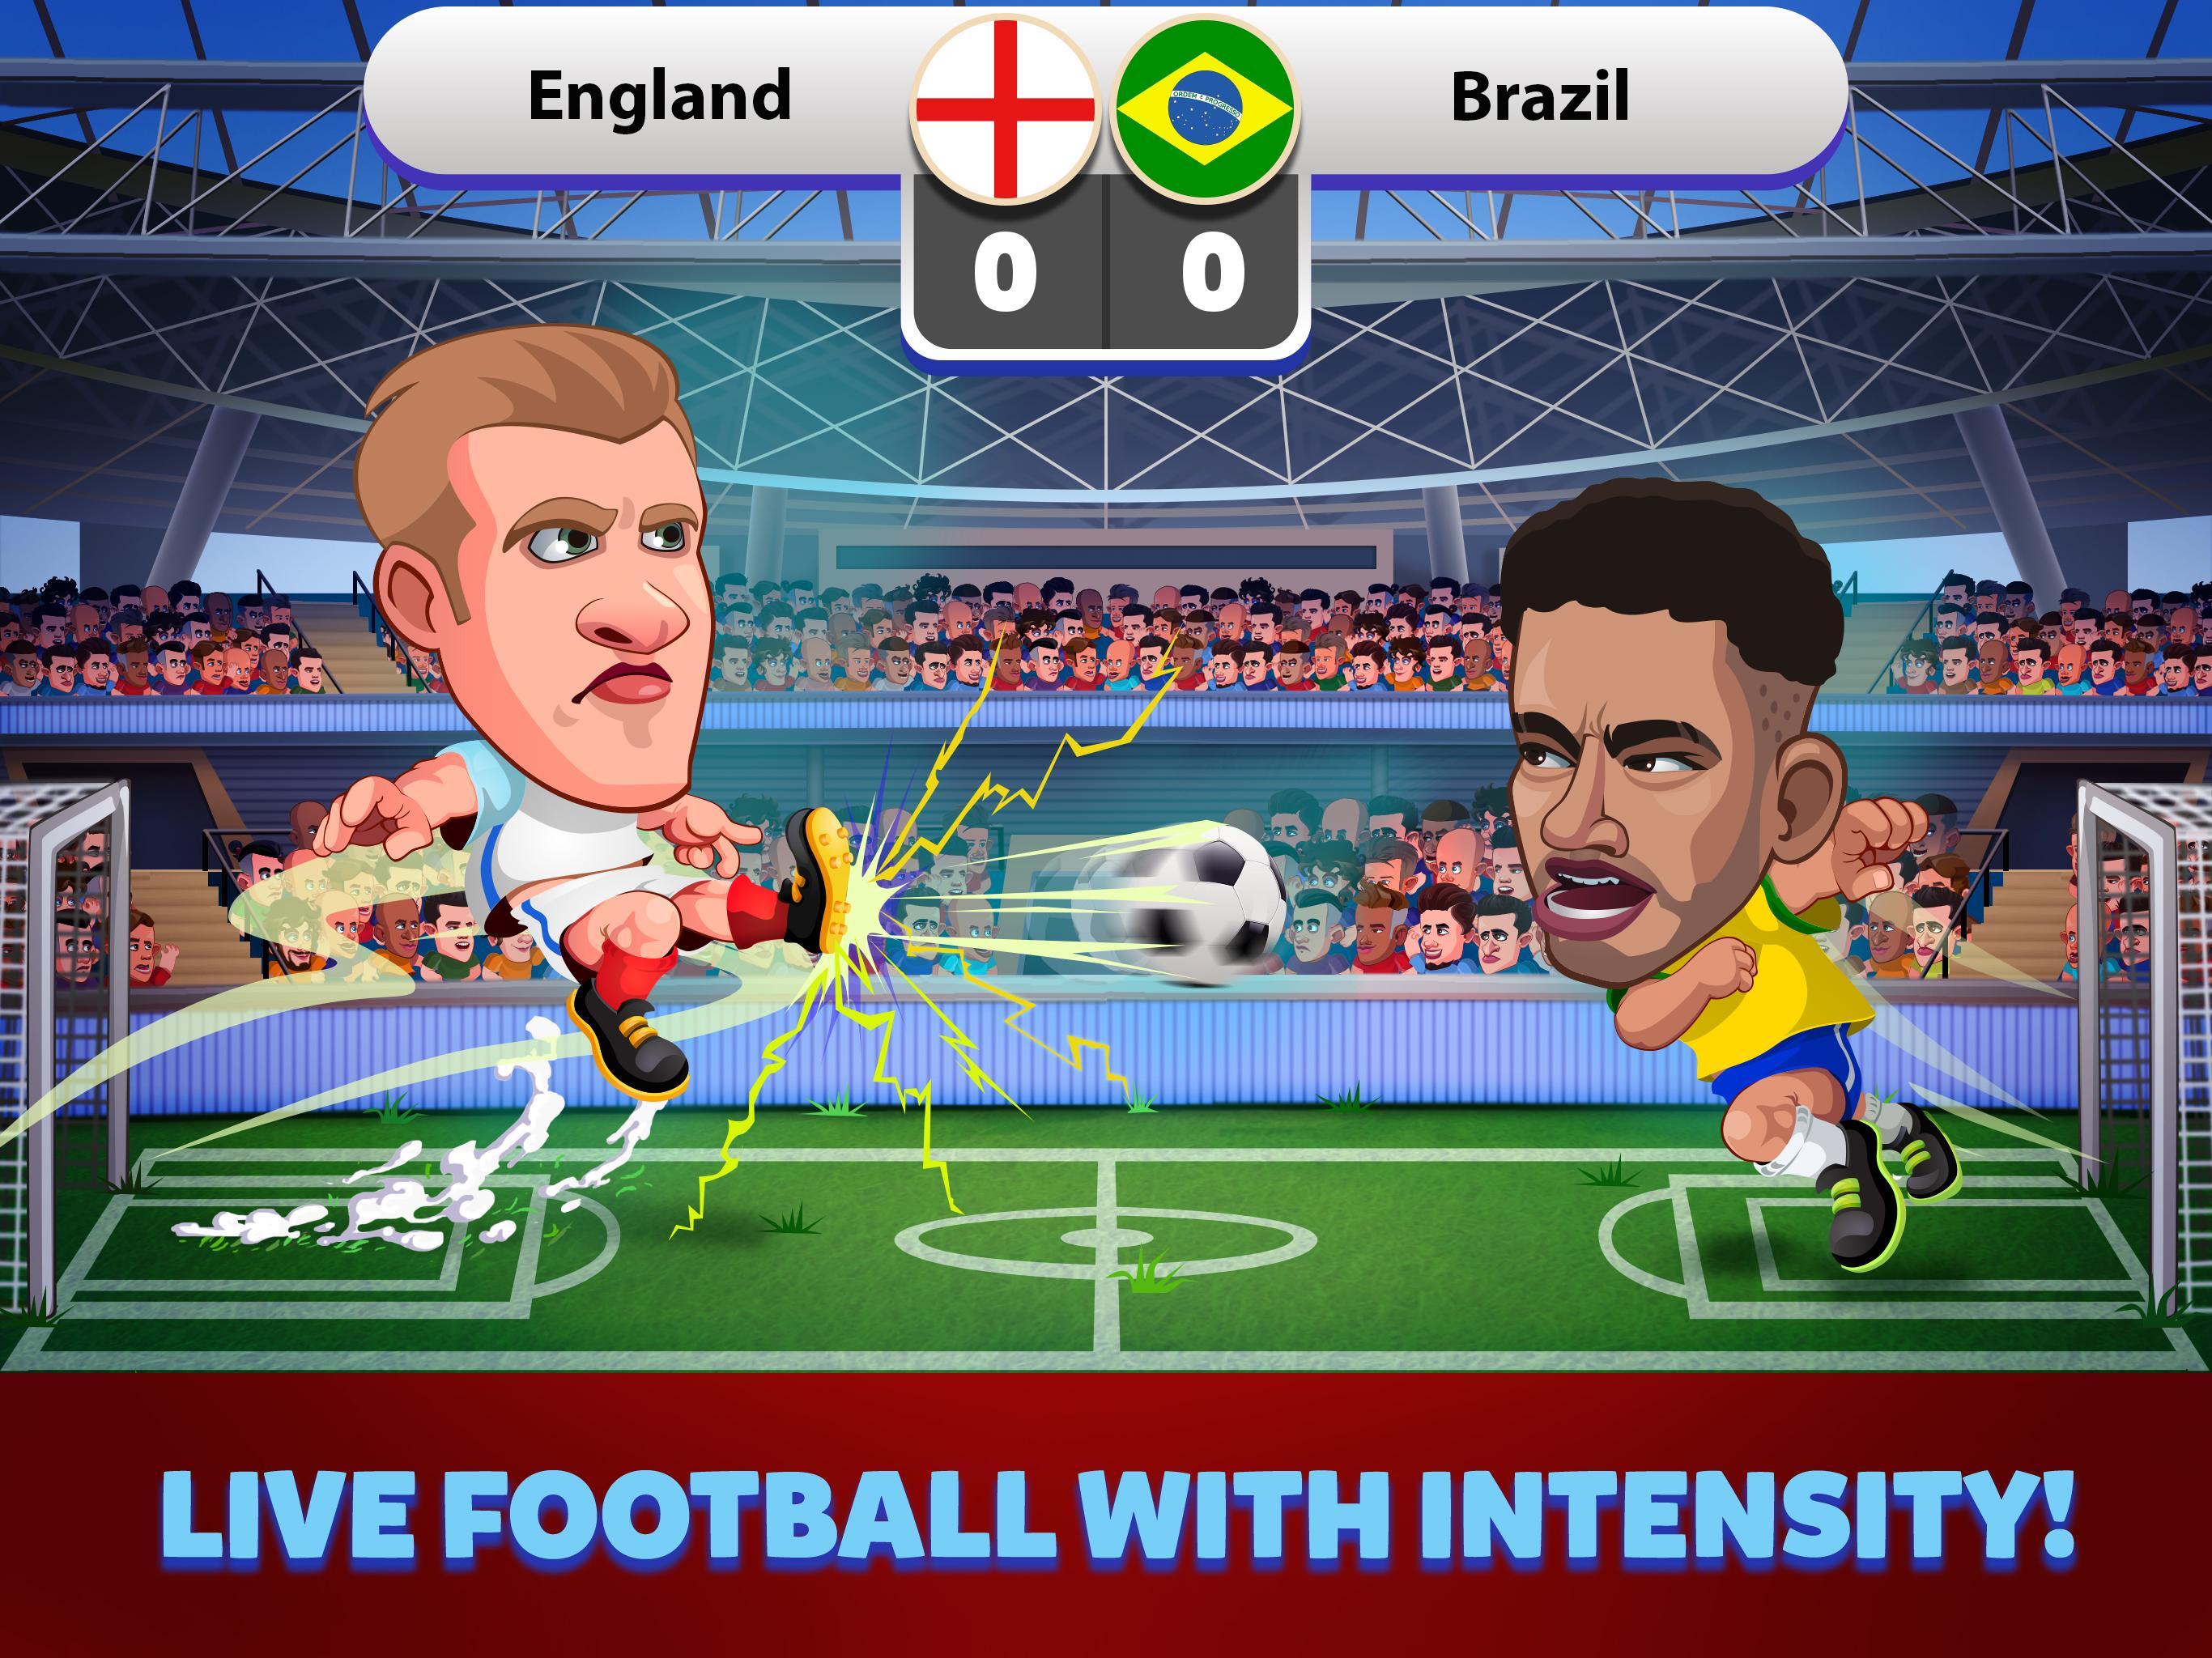 Head Soccer Russia Cup 2018: World Football League for Android - APK  Download